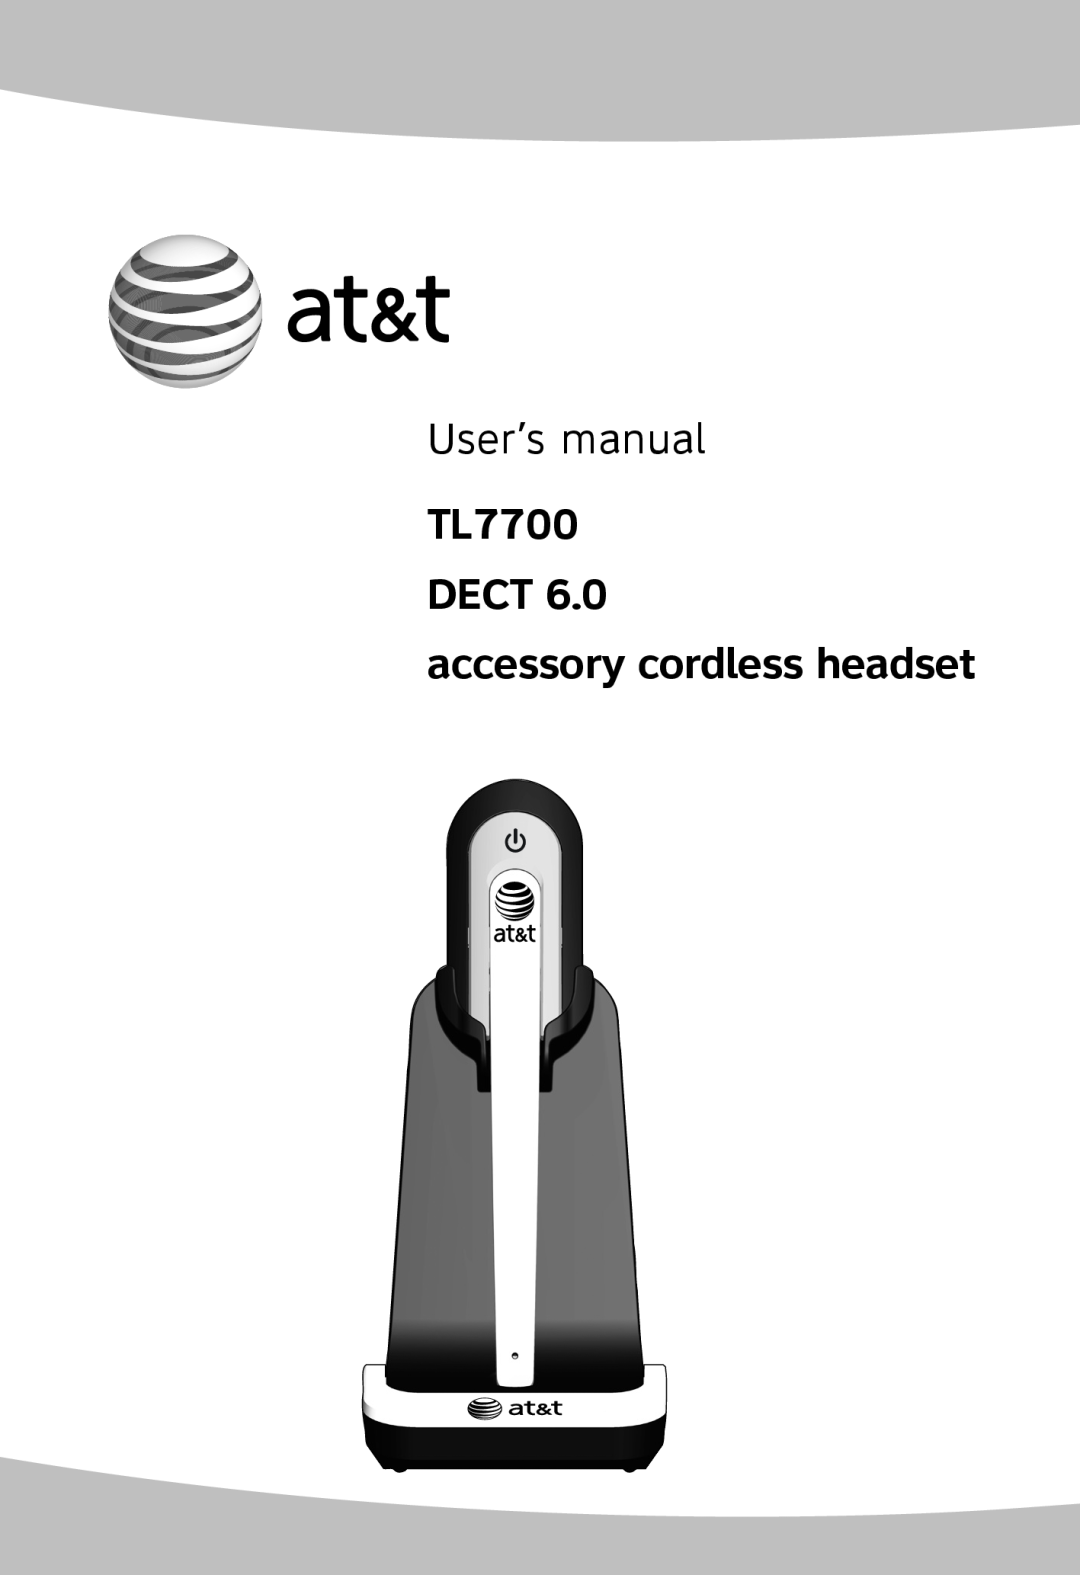 AT&T user manual TL7700 DECT accessory cordless headset 